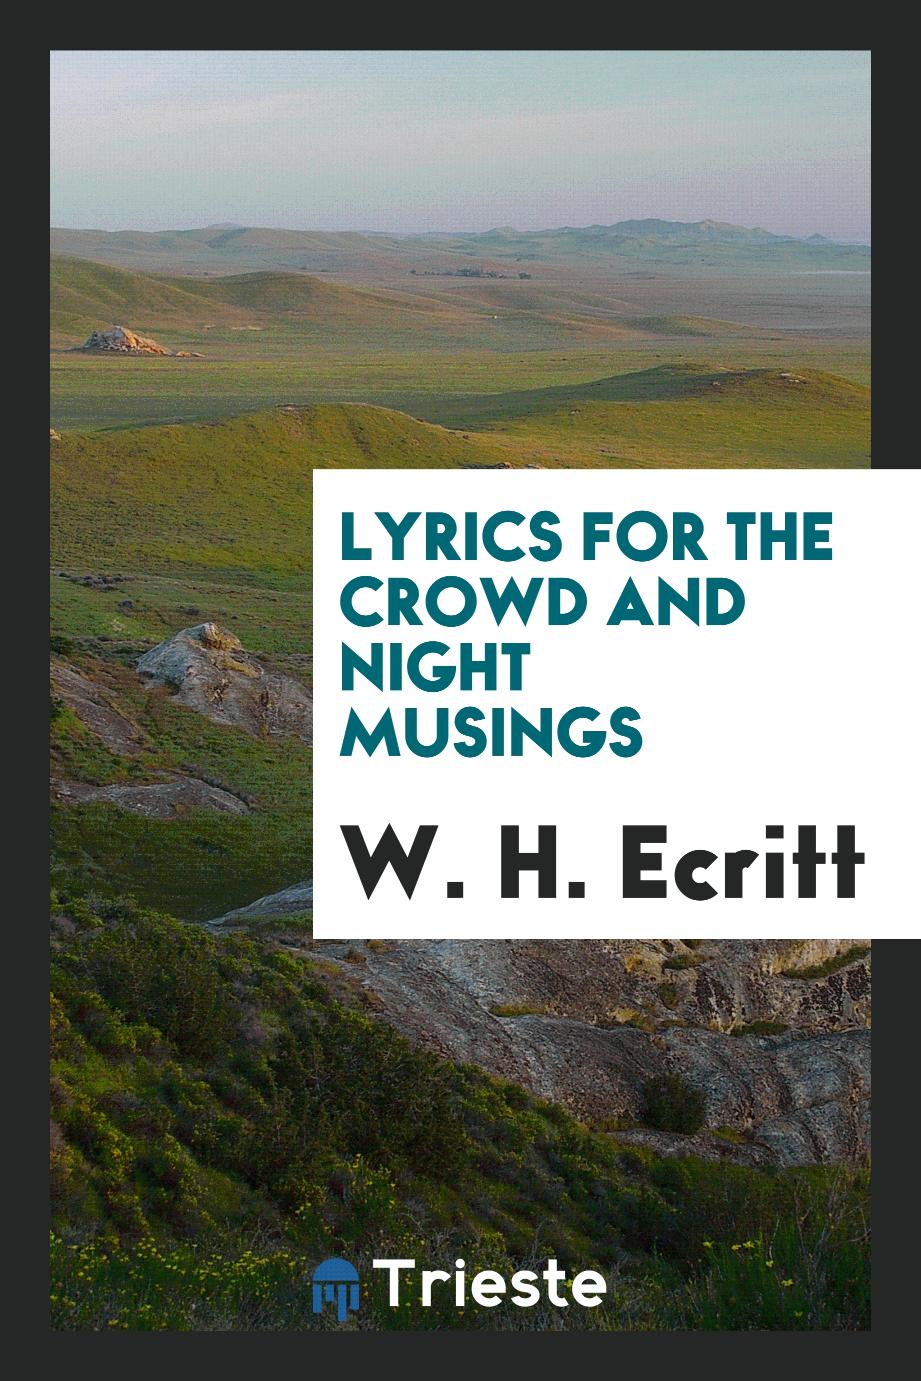 Lyrics for the Crowd and Night Musings